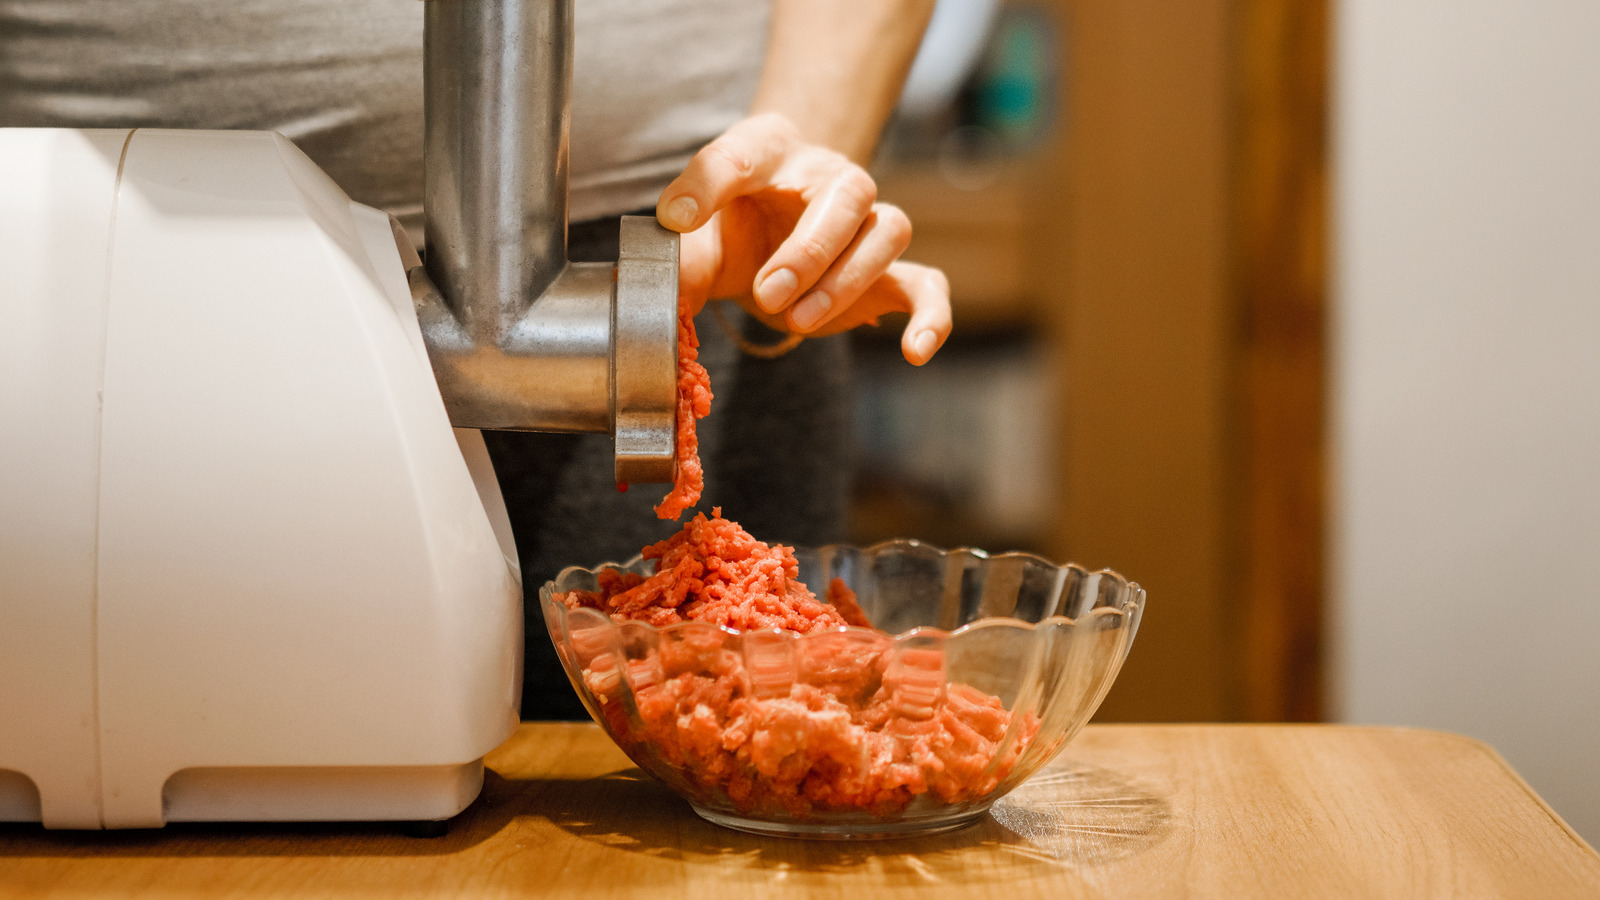 https://www.thedailymeal.com/img/gallery/11-mistakes-you-need-to-avoid-when-grinding-your-own-meat/l-intro-1690985082.jpg